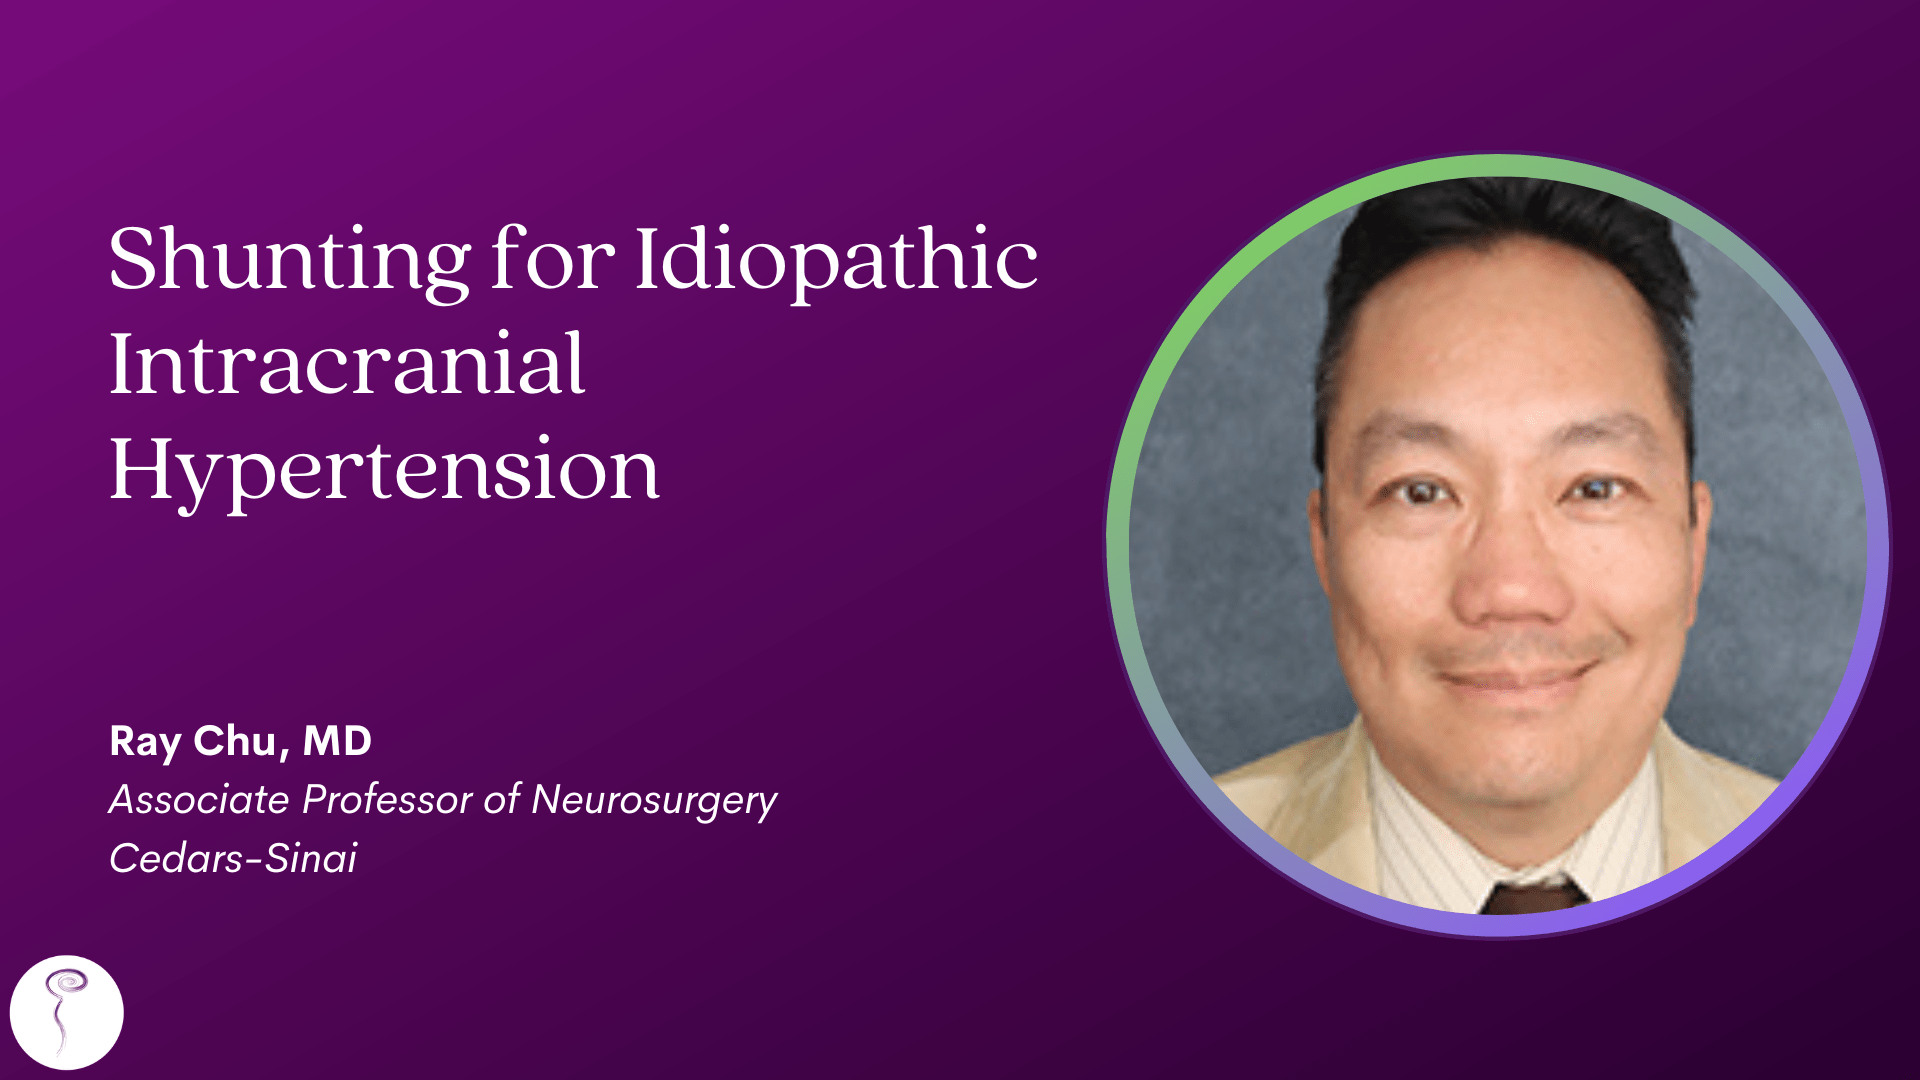 2023 Intracranial Hypotension Conference: Dr. Ray Chu 2